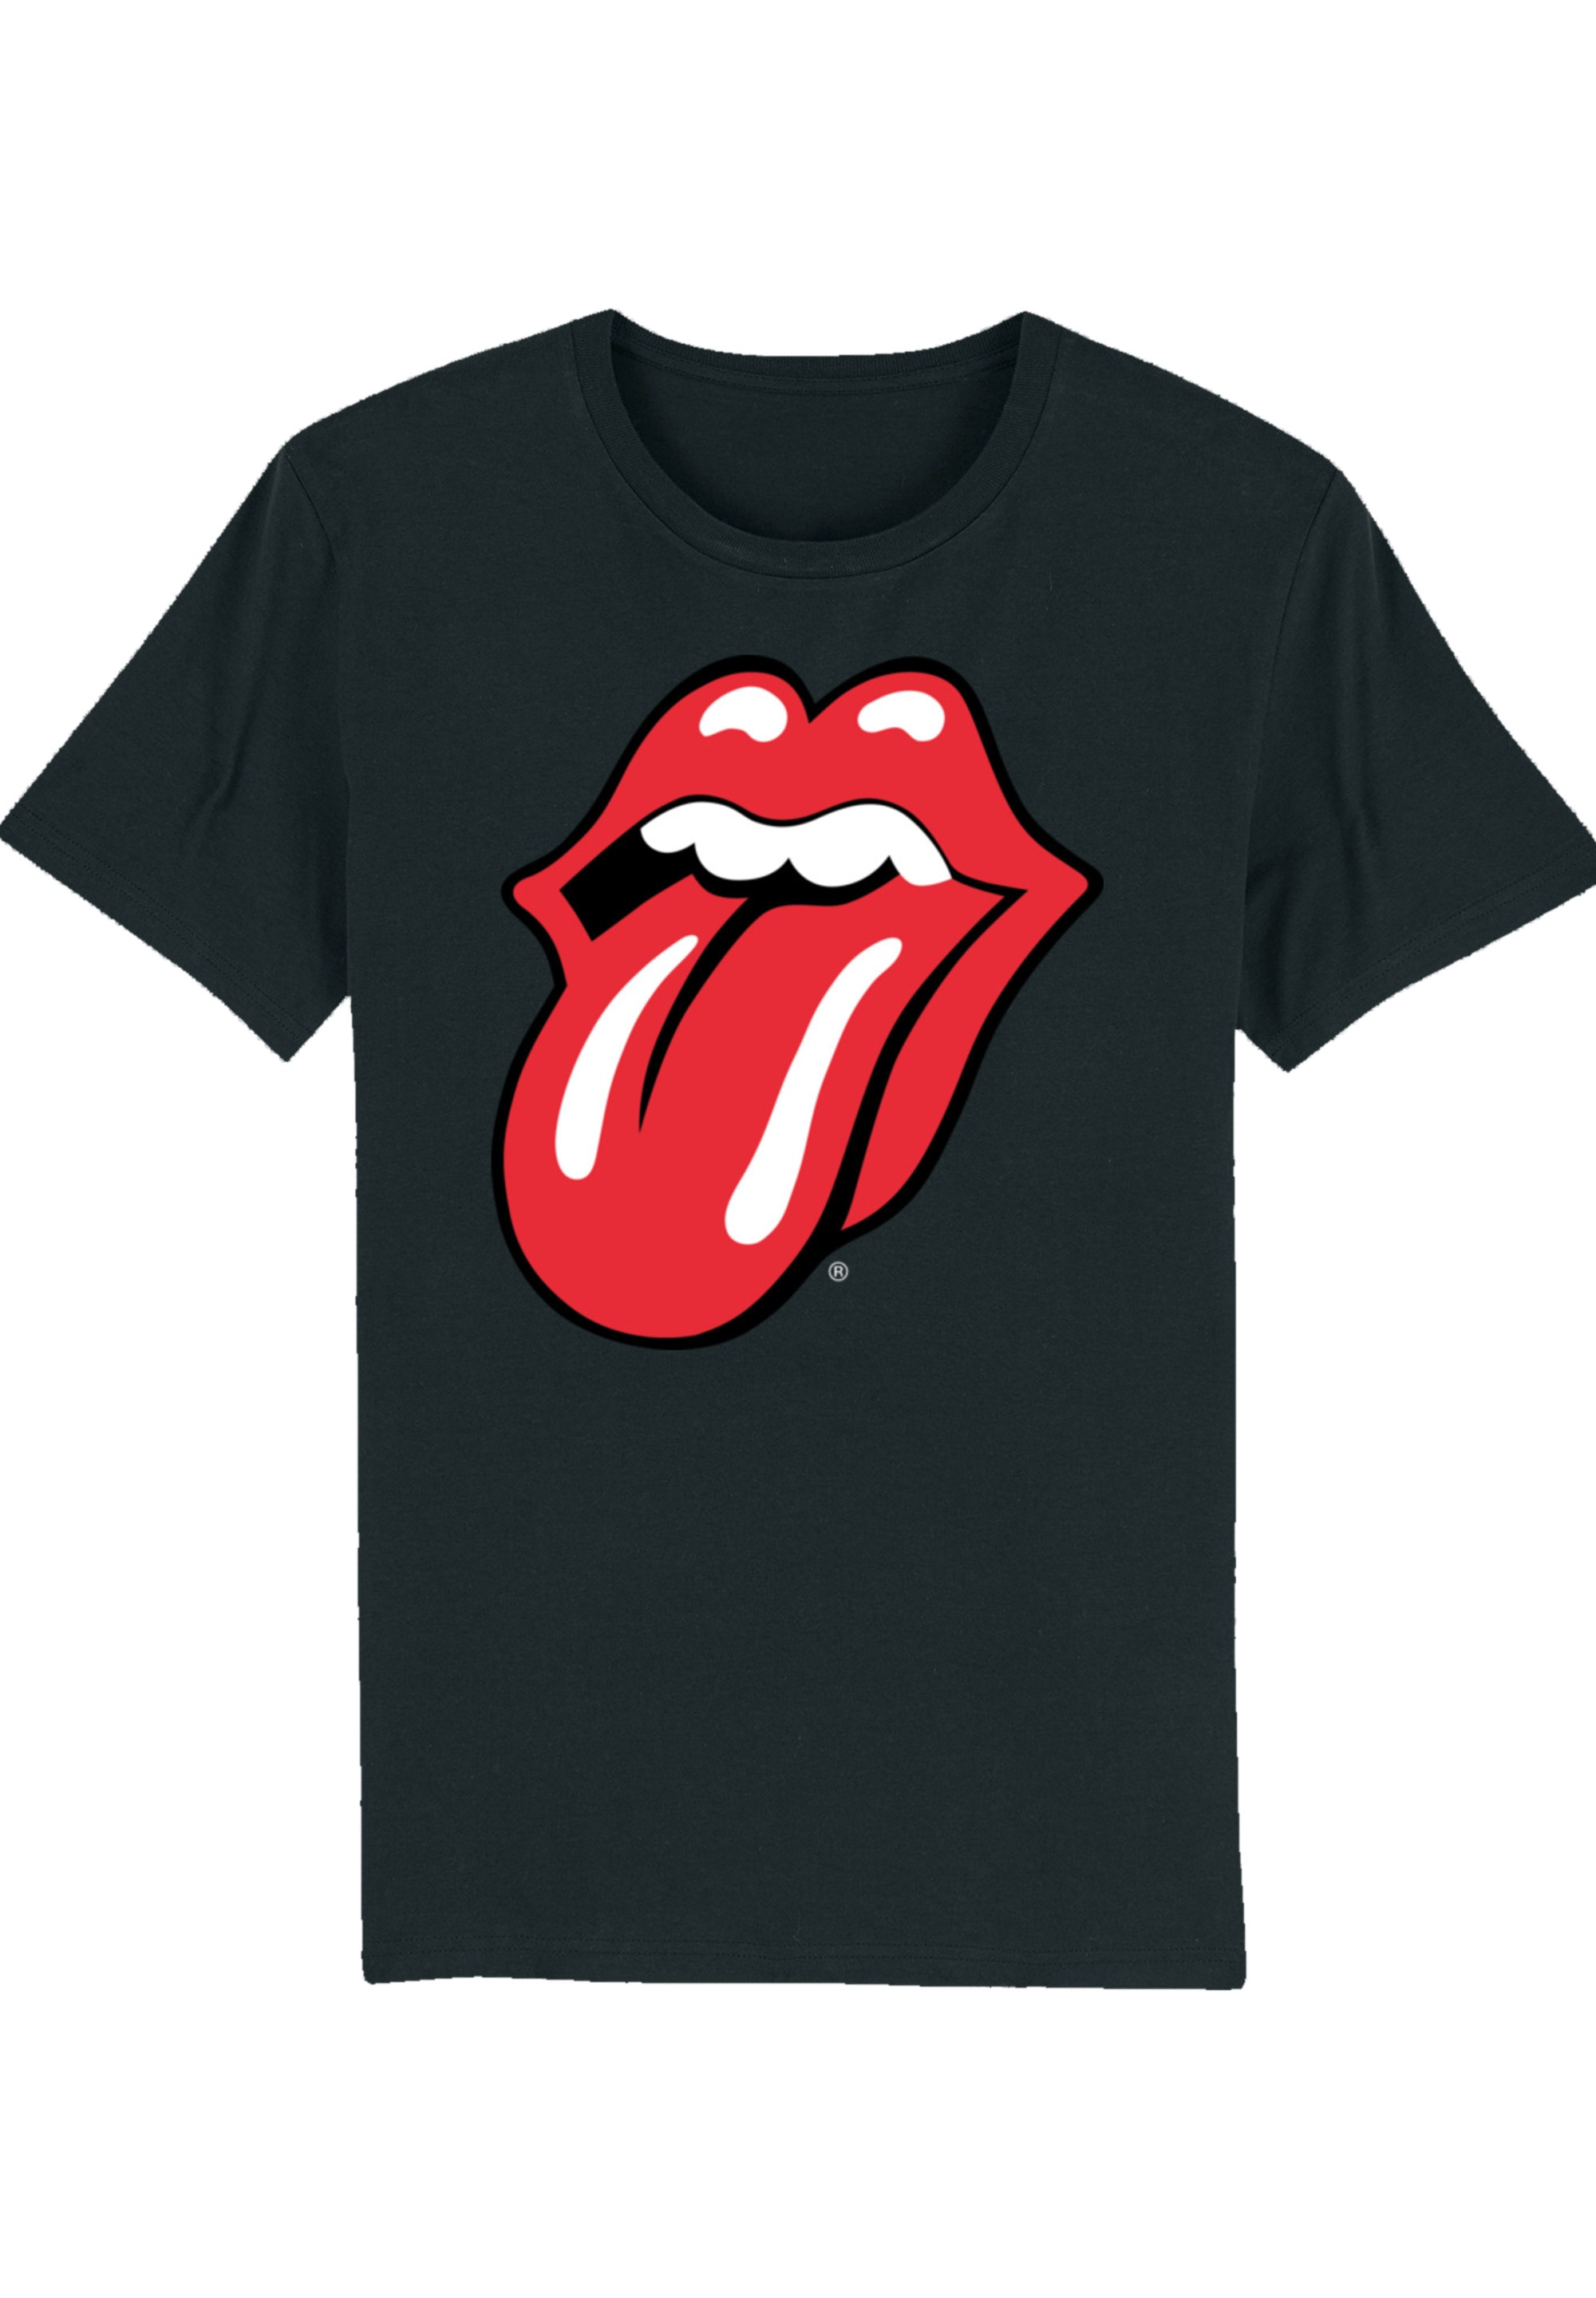 F4NT4STIC T-Shirt »The Rolling Stones Print BAUR online | kaufen Zunge«, Rote